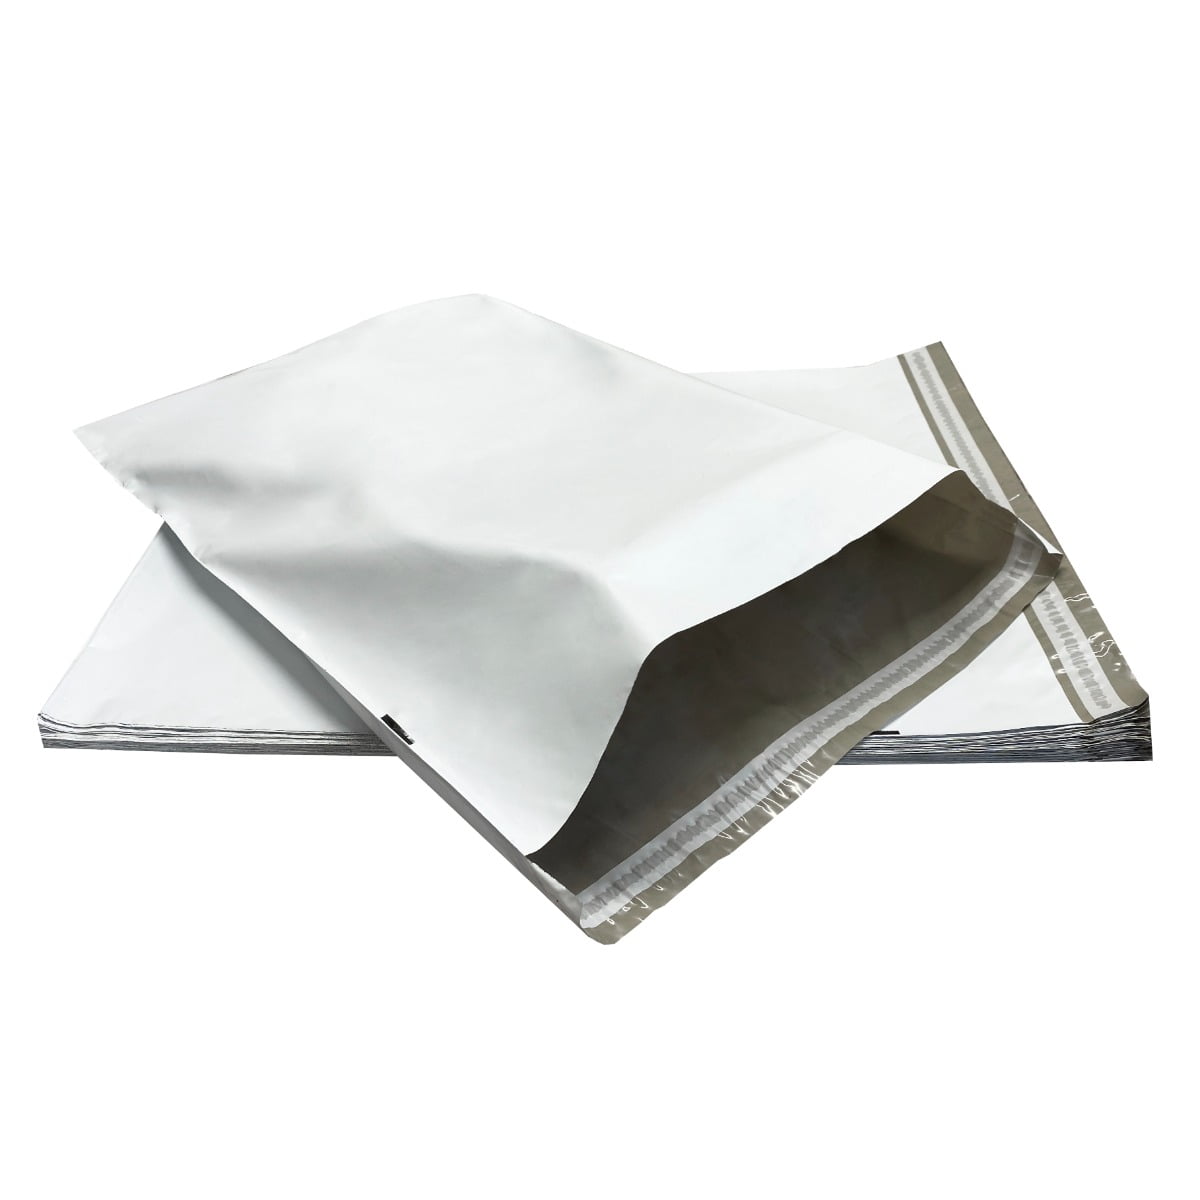 5 10/ 15 Pcs THICK 2.5mil WHITE POLY MAILERS ENVELOPES SHIPPING BAGS 14" x 17" 